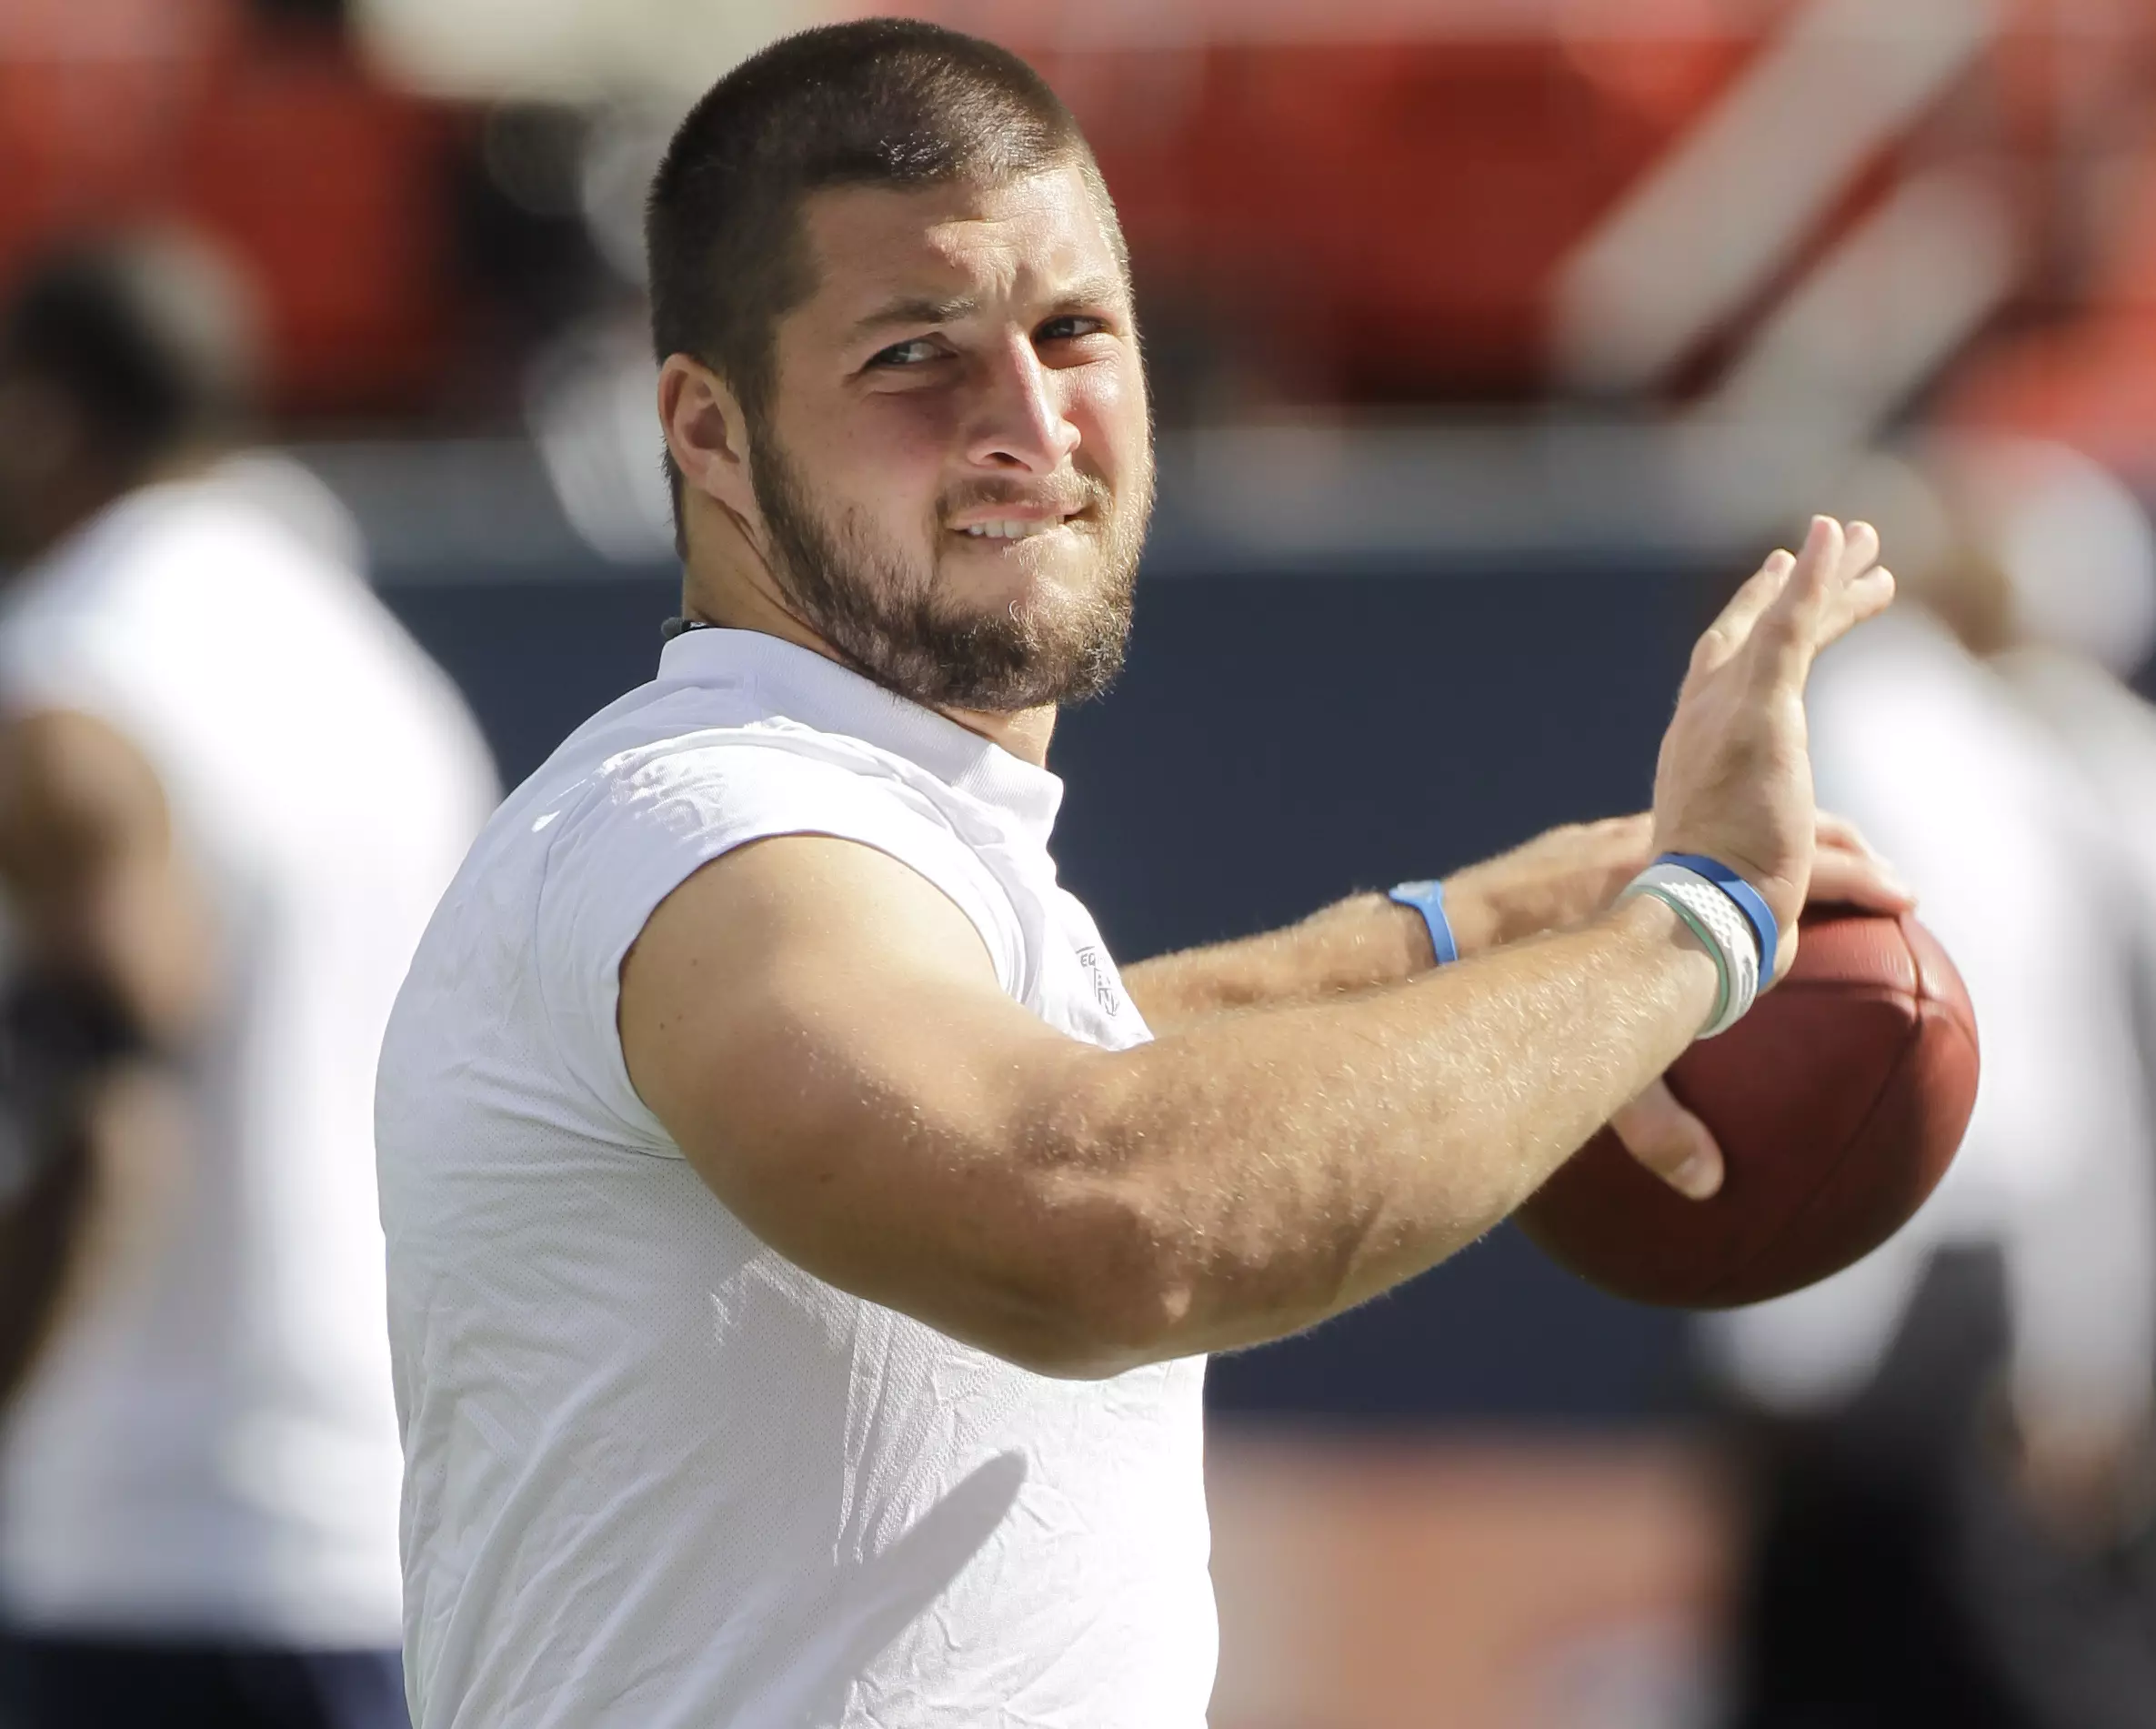 Tim Tebow never quite made it in the NFL despite his heroics in college football